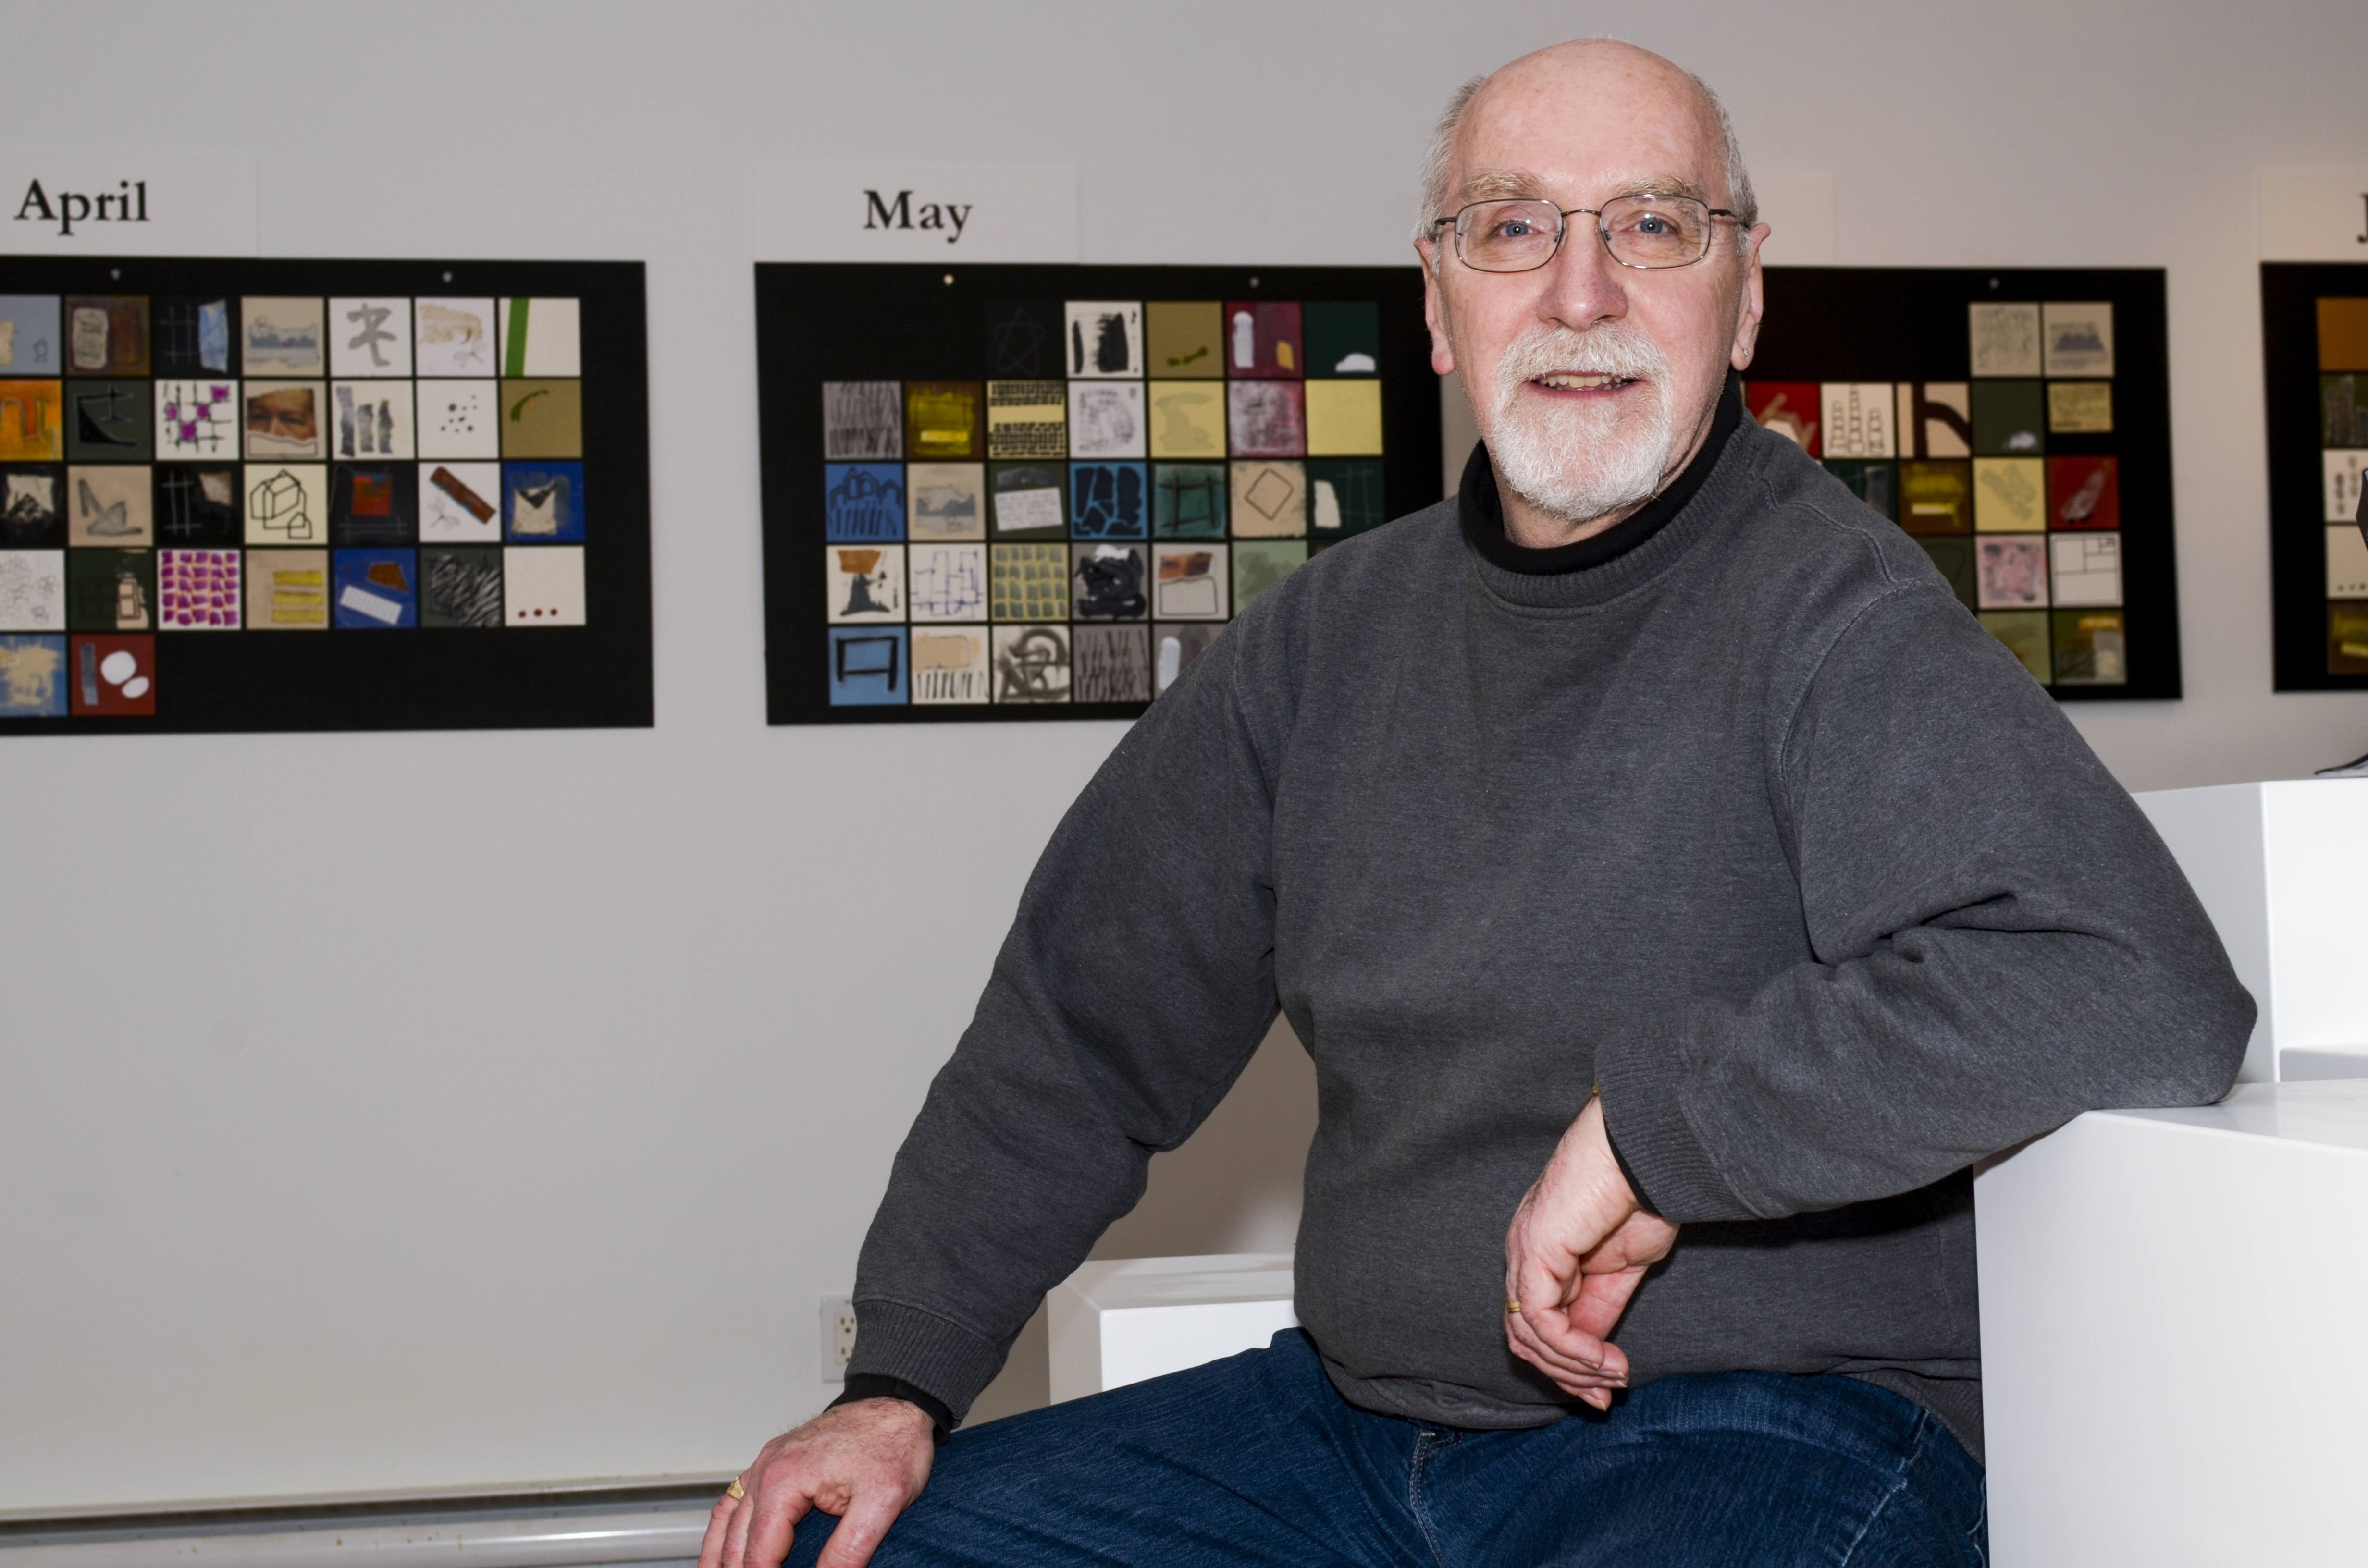 STORY OF TIME – Local artist Paul Boultbee relaxes in the Harris-Warke Gallery